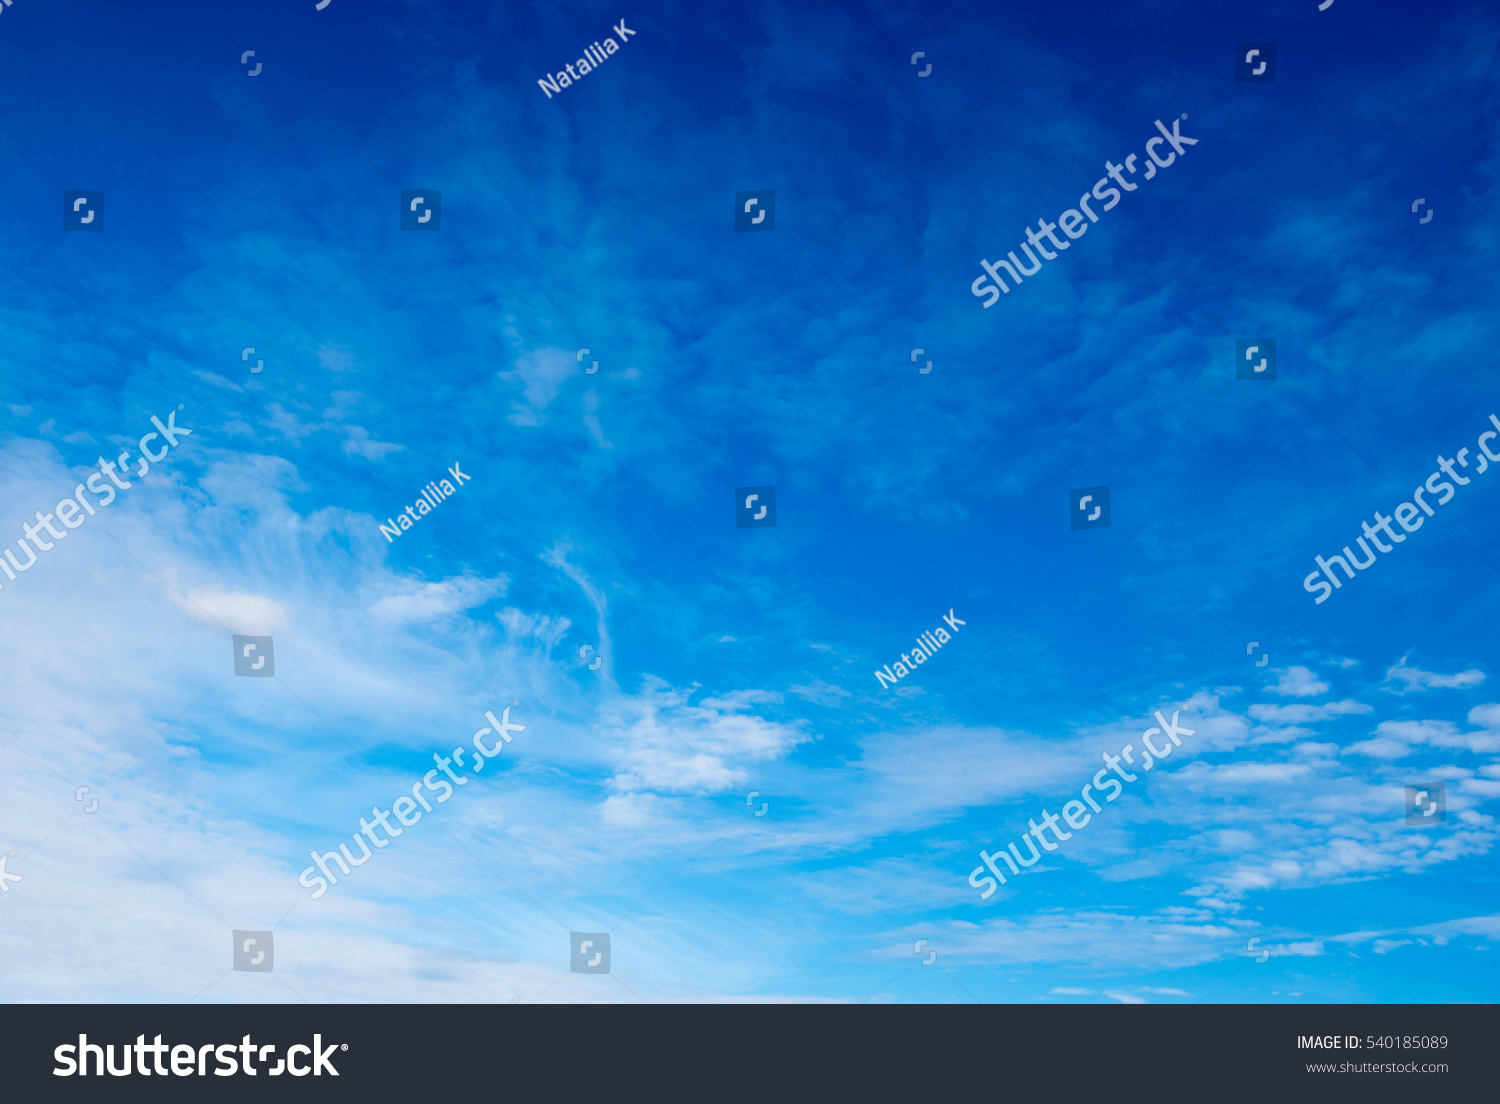 blue sky background with white clouds #540185089